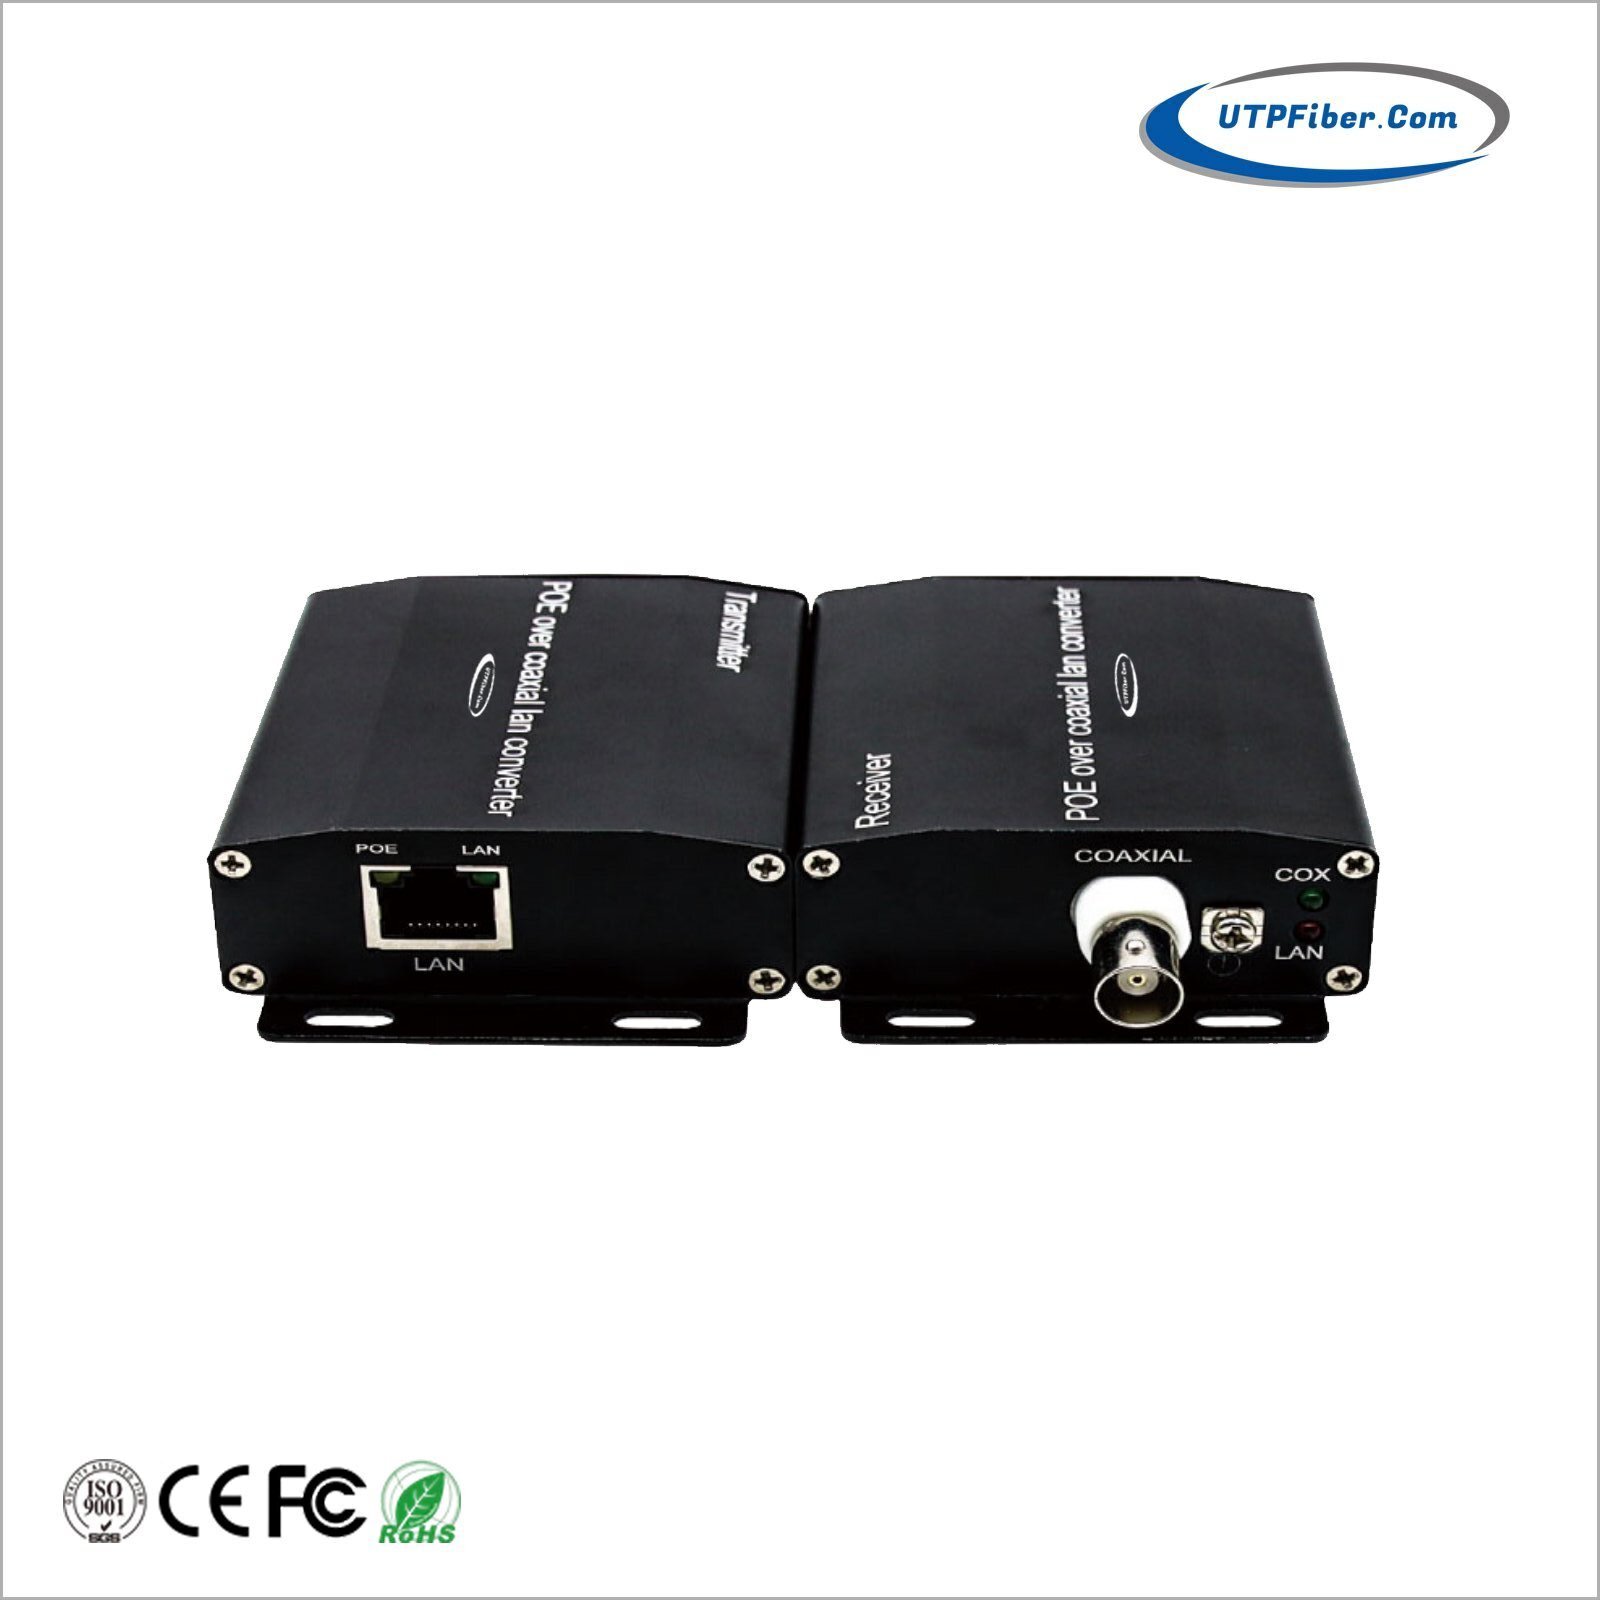 Ethernet over Coax Extender with PoE+